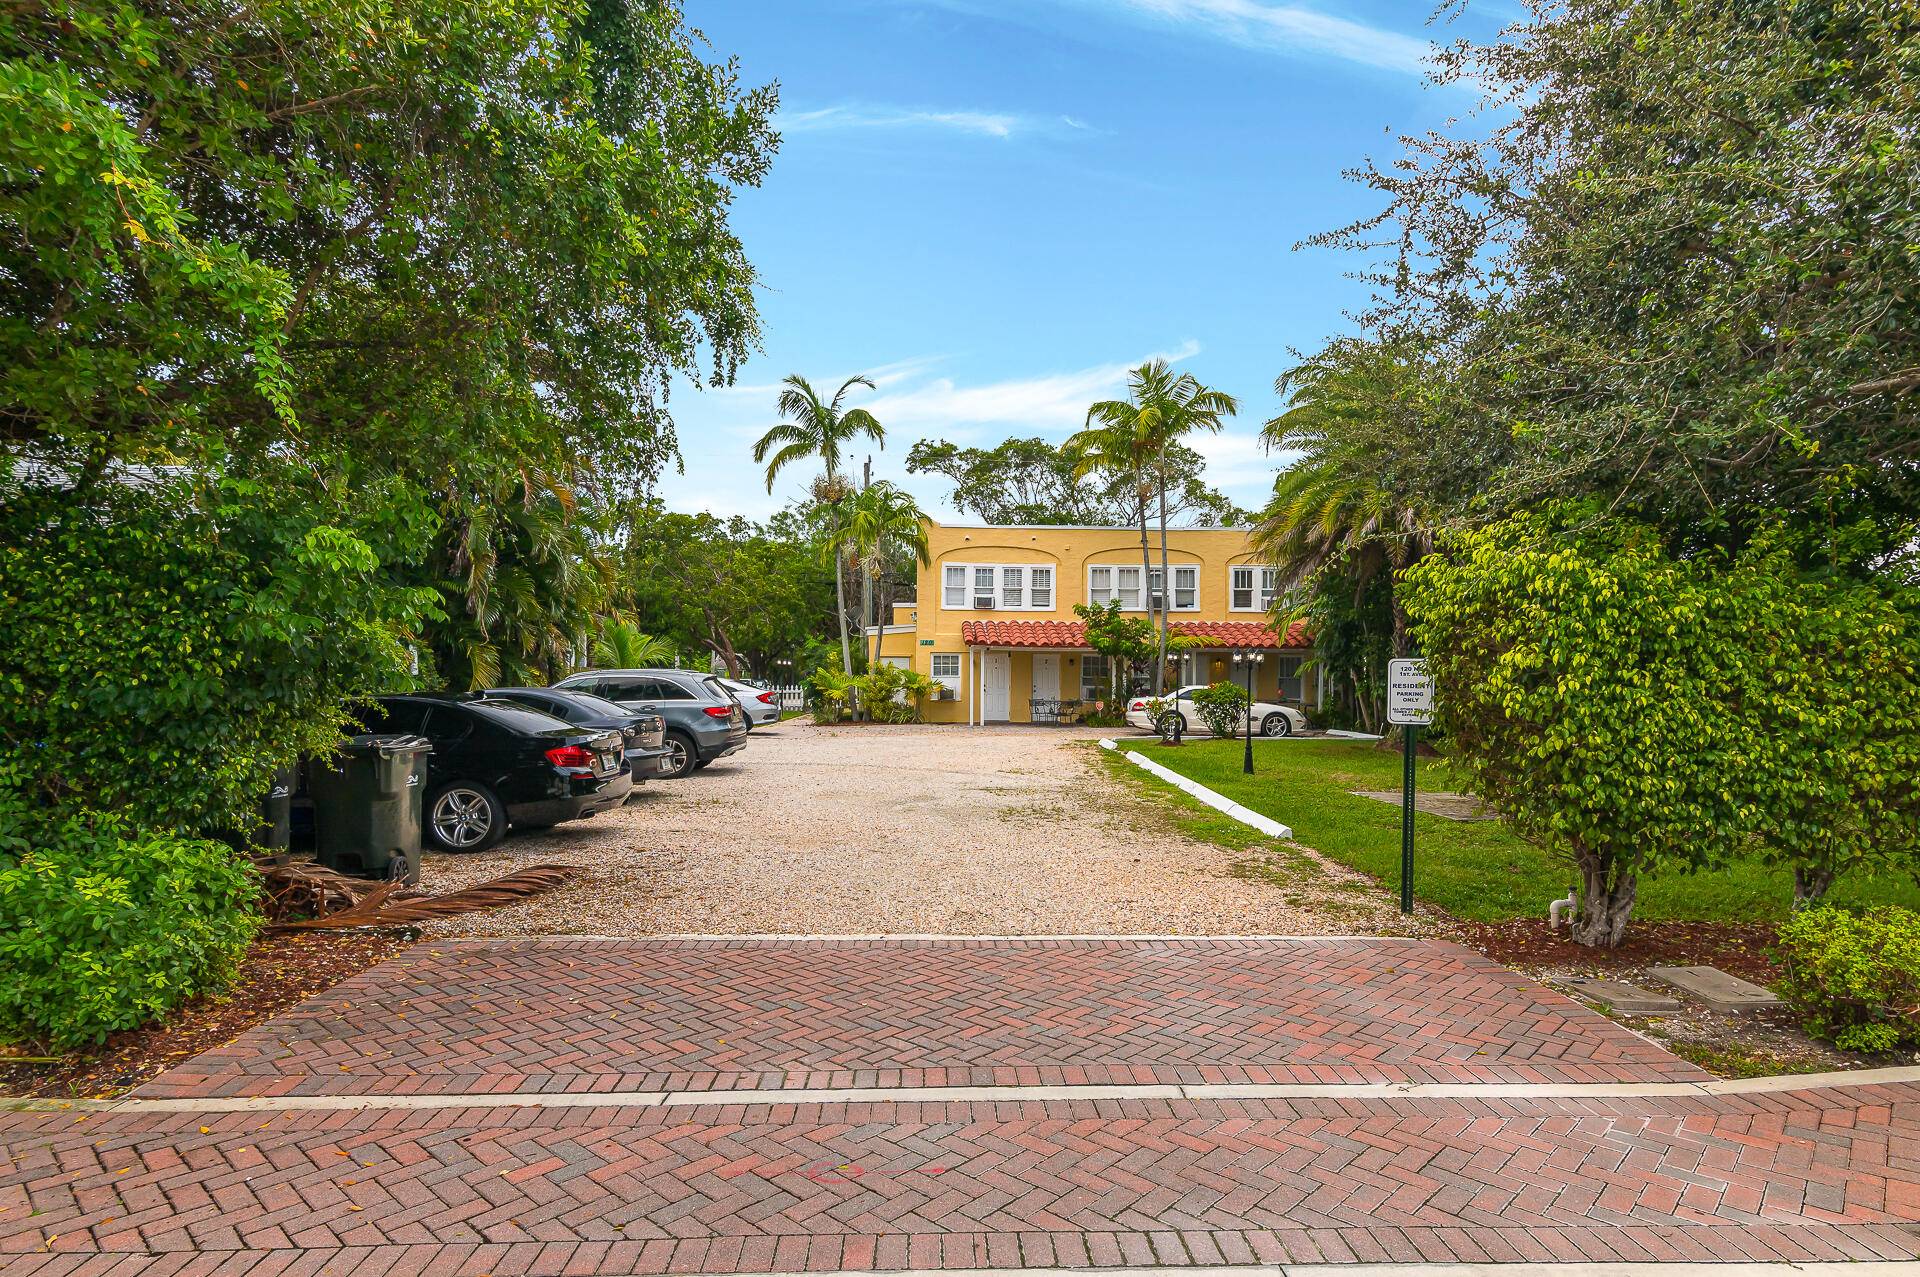 Spectacular investment opportunity in the very desirable Downtown Delray market.